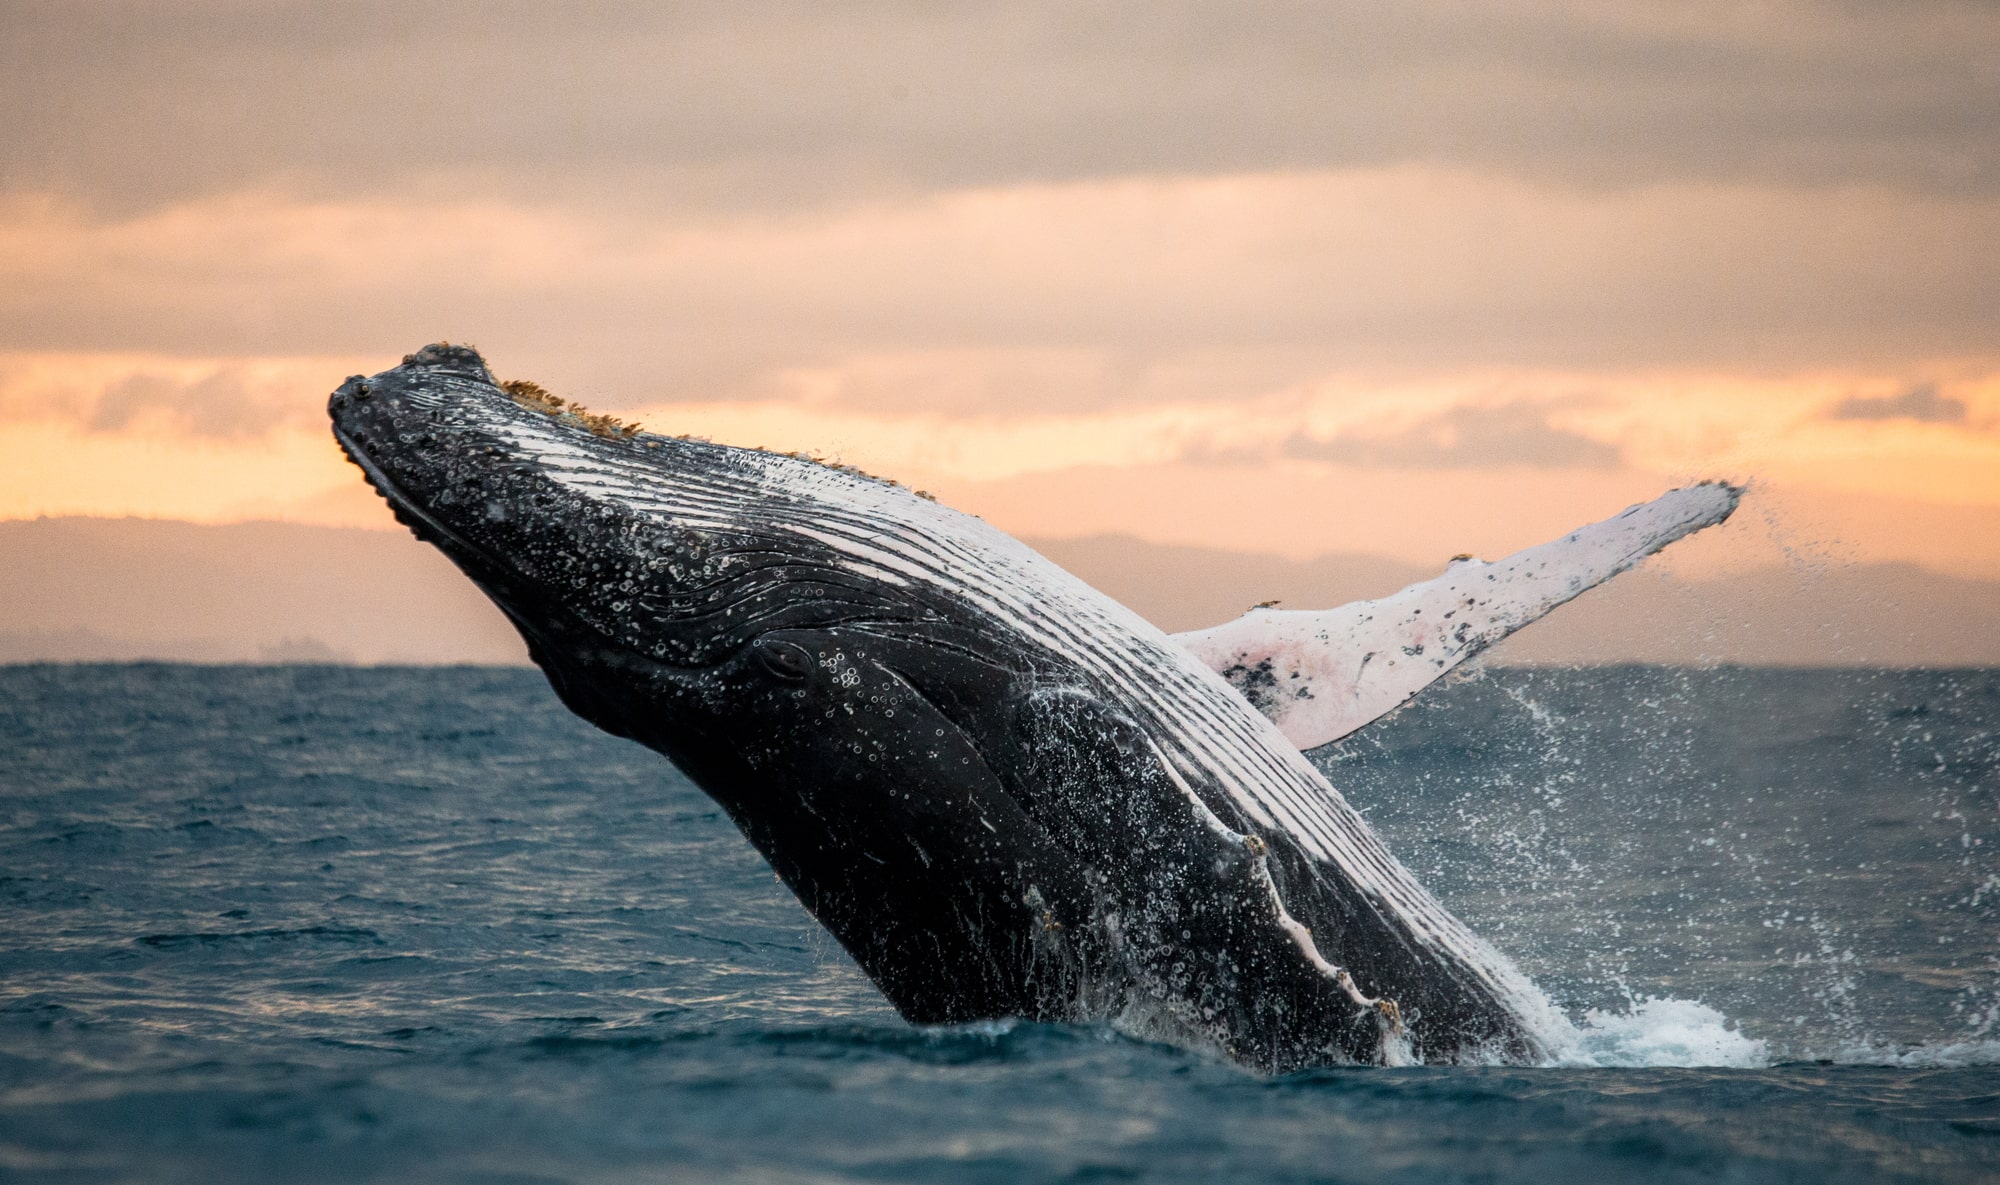 whale watching photography tips